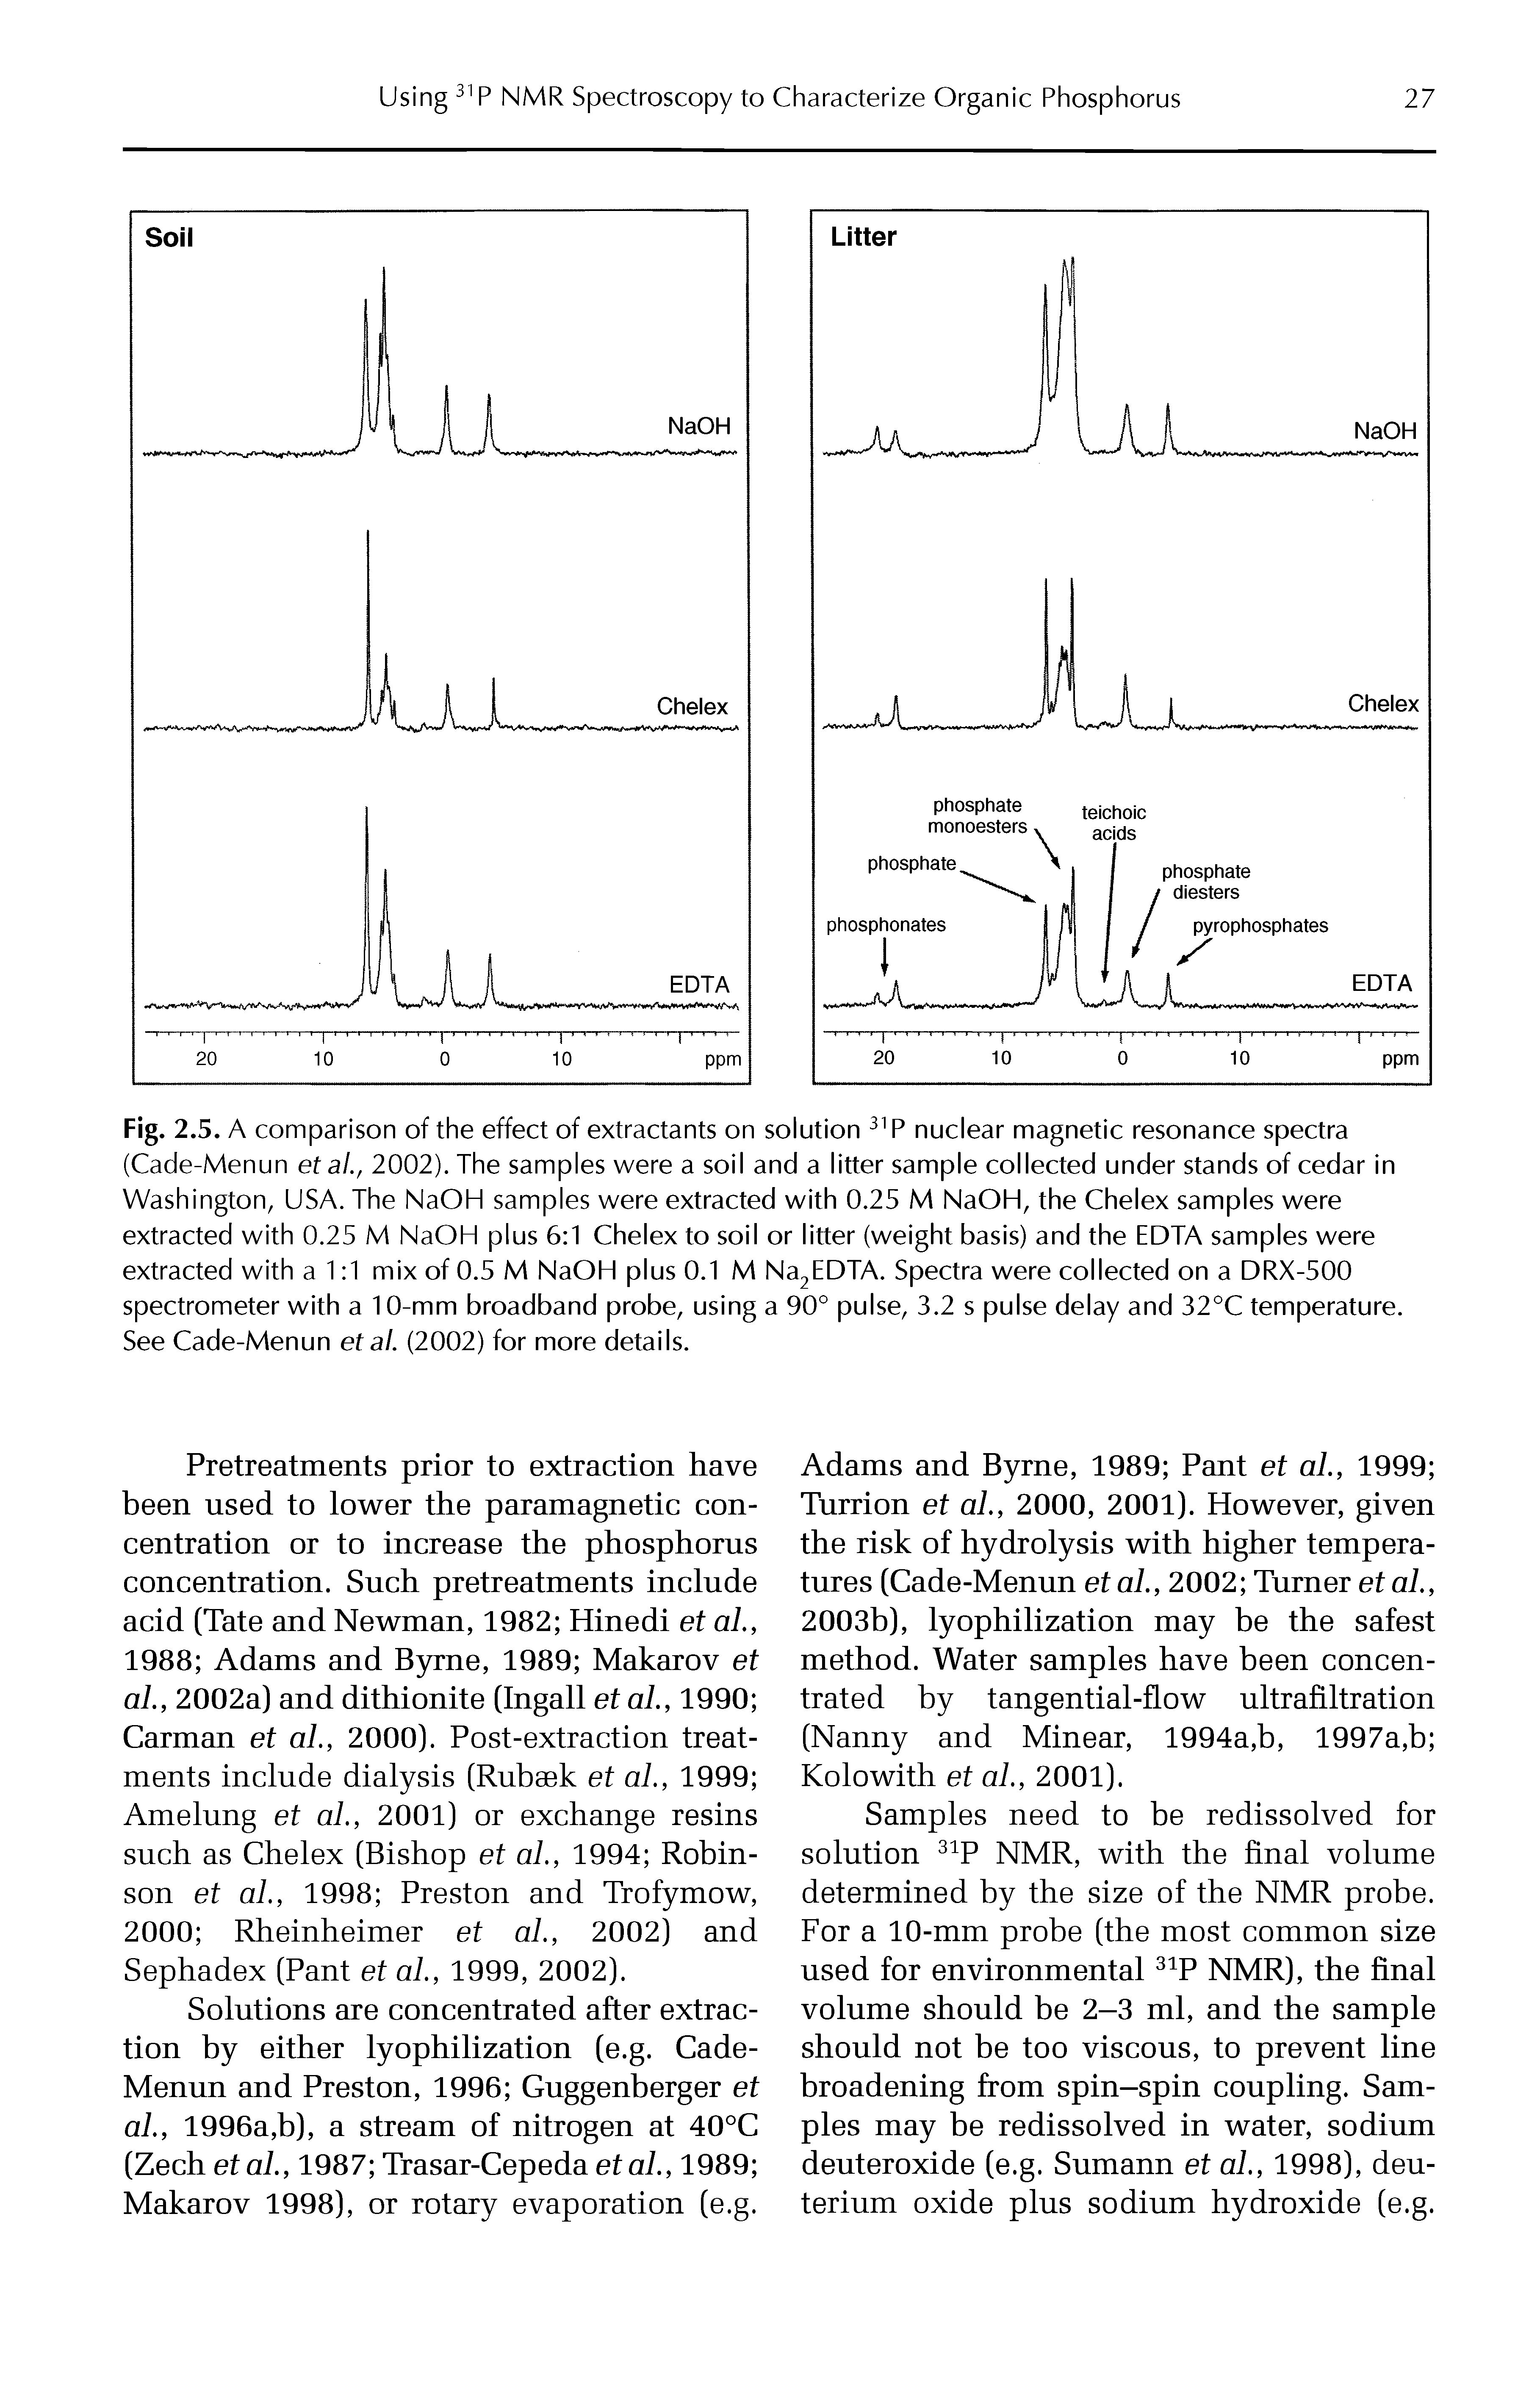 Fig. 2.5. A comparison of the effect of extractants on solution P nuclear magnetic resonance spectra (Cade-Menun etal., 2002). The samples were a soil and a litter sample collected under stands of cedar in Washington, USA. The NaOH samples were extracted with 0.25 M NaOH, the Chelex samples were extracted with 0.25 M NaOH plus 6 1 Chelex to soil or litter (weight basis) and the EDTA samples were extracted with a 1 1 mix of 0.5 M NaOH plus 0.1 M Na2EDTA. Spectra were collected on a DRX-500 spectrometer with a 10-mm broadband probe, using a 90° pulse, 3.2 s pulse delay and 32°C temperature. See Cade-Menun et al. (2002) for more details.